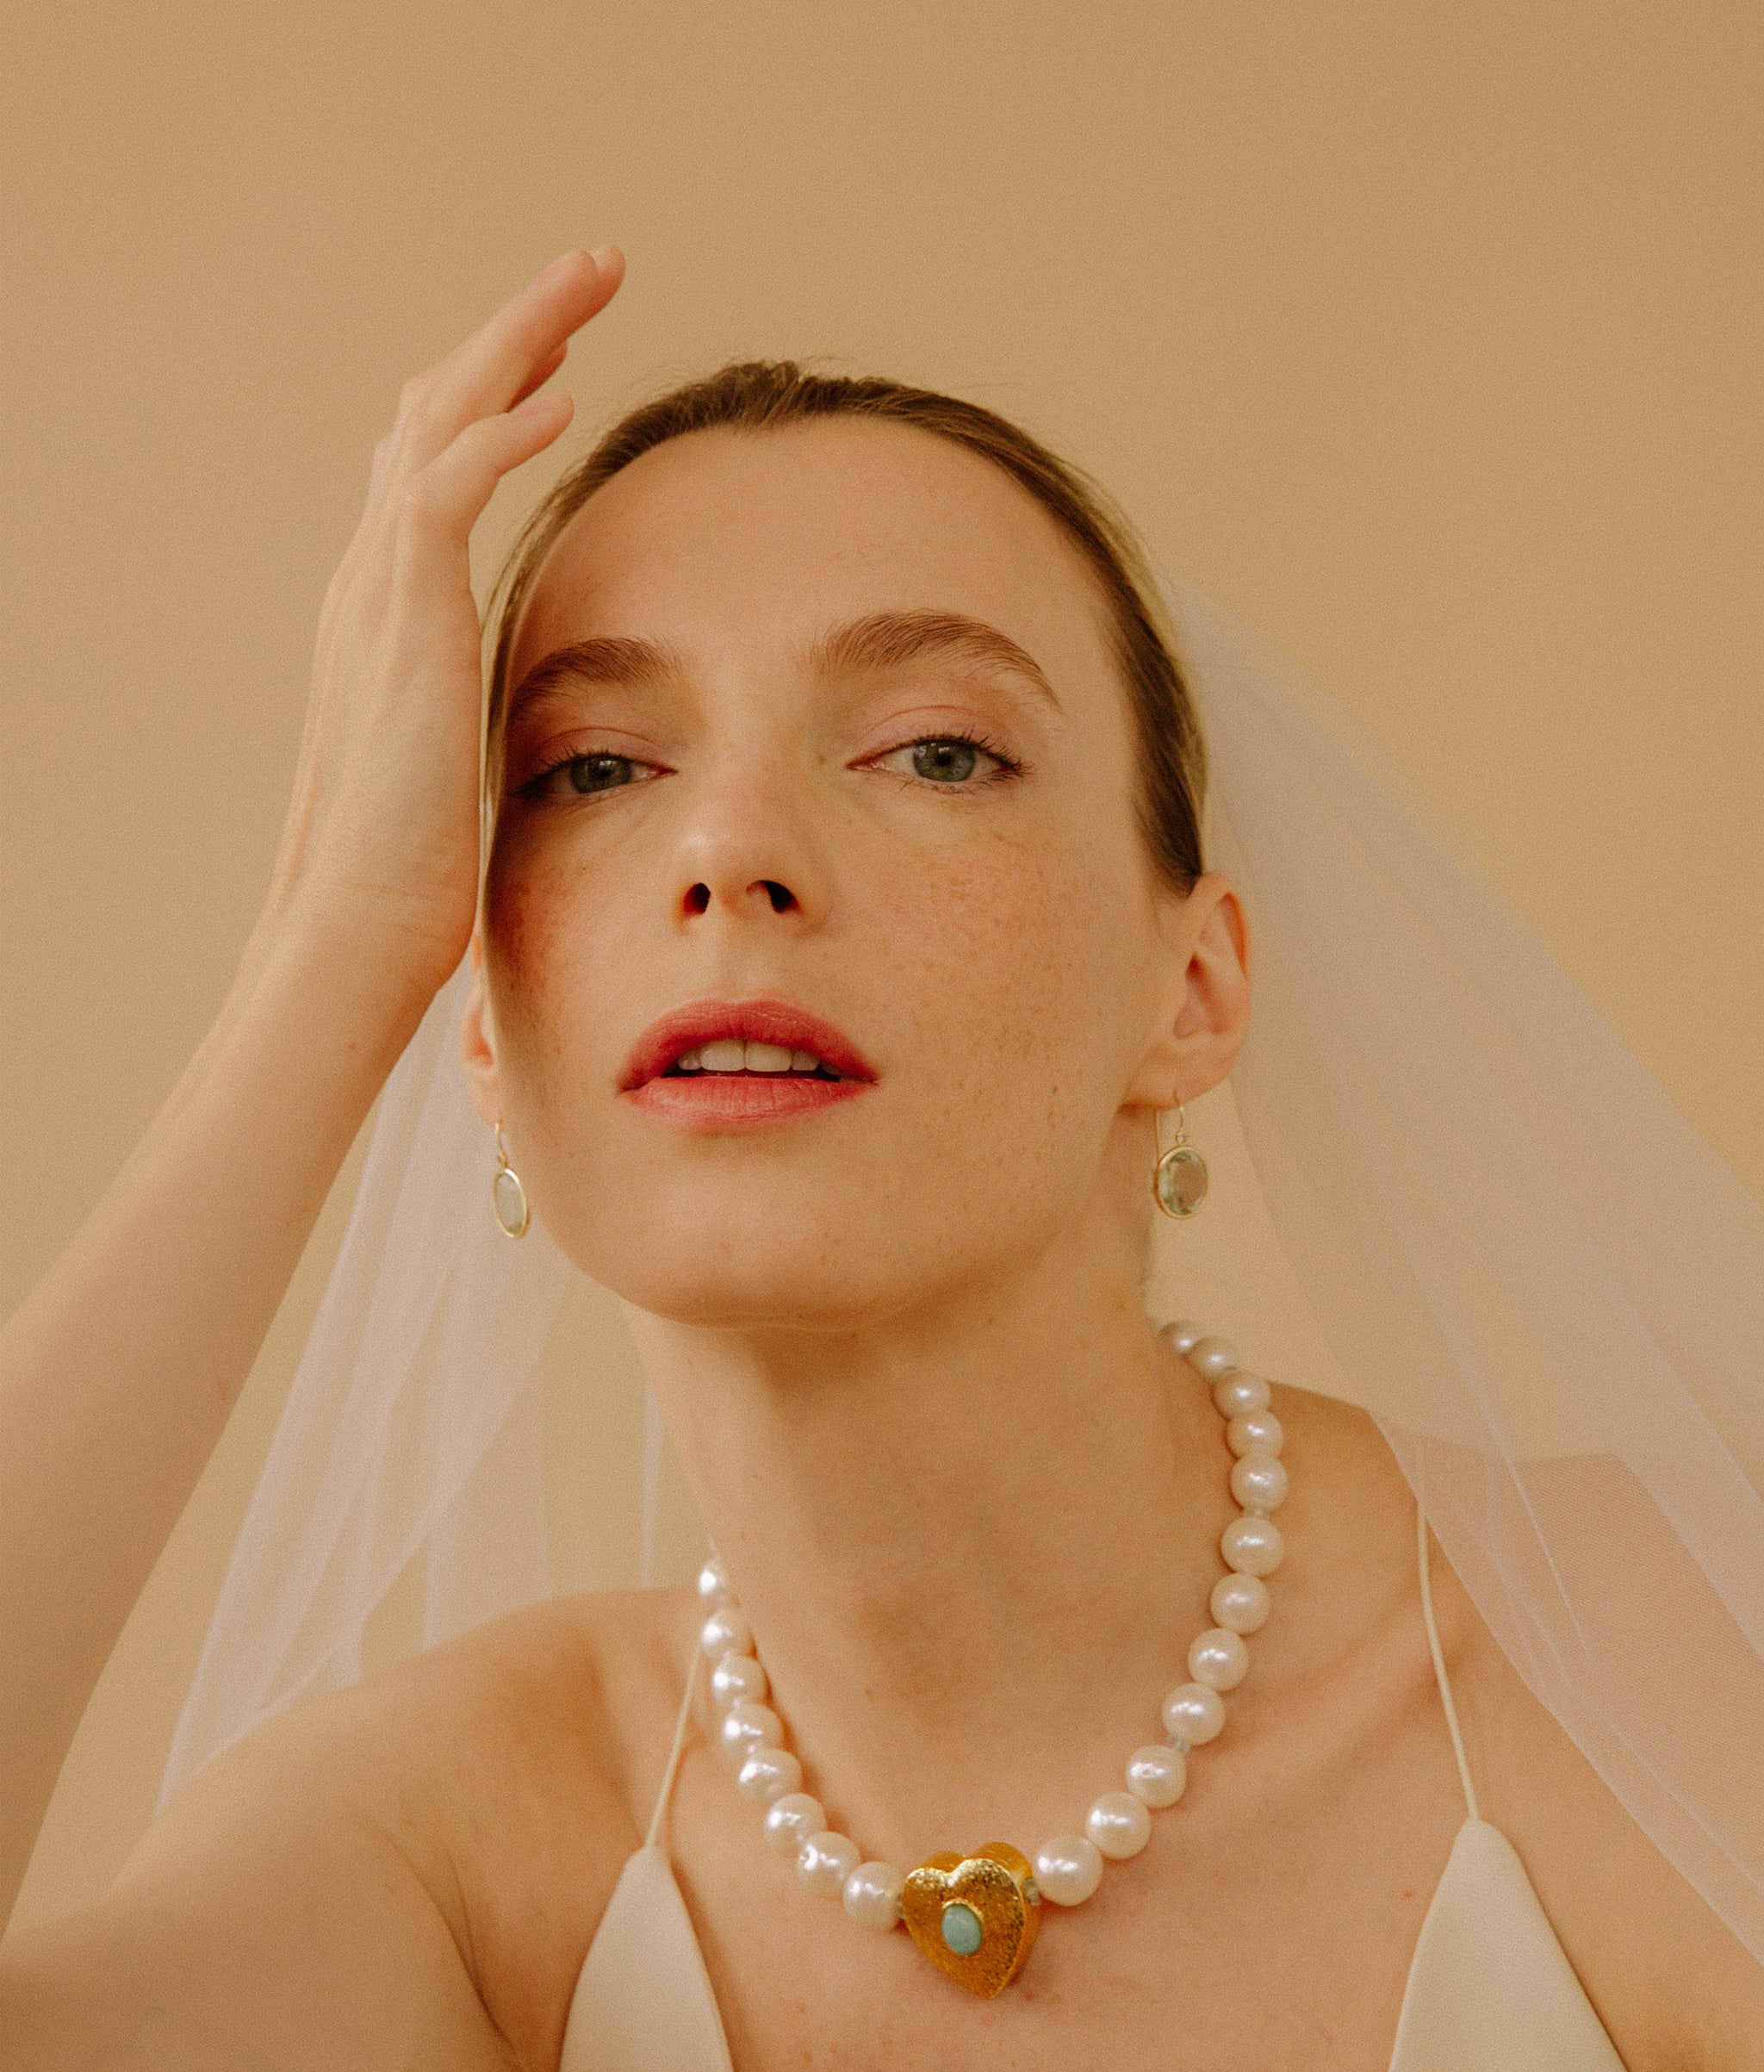 Model on a tan background wearing the Gemini Collar in Pearl and the 14k Gold Pool Earrings in Green Amethyst & Diamond.